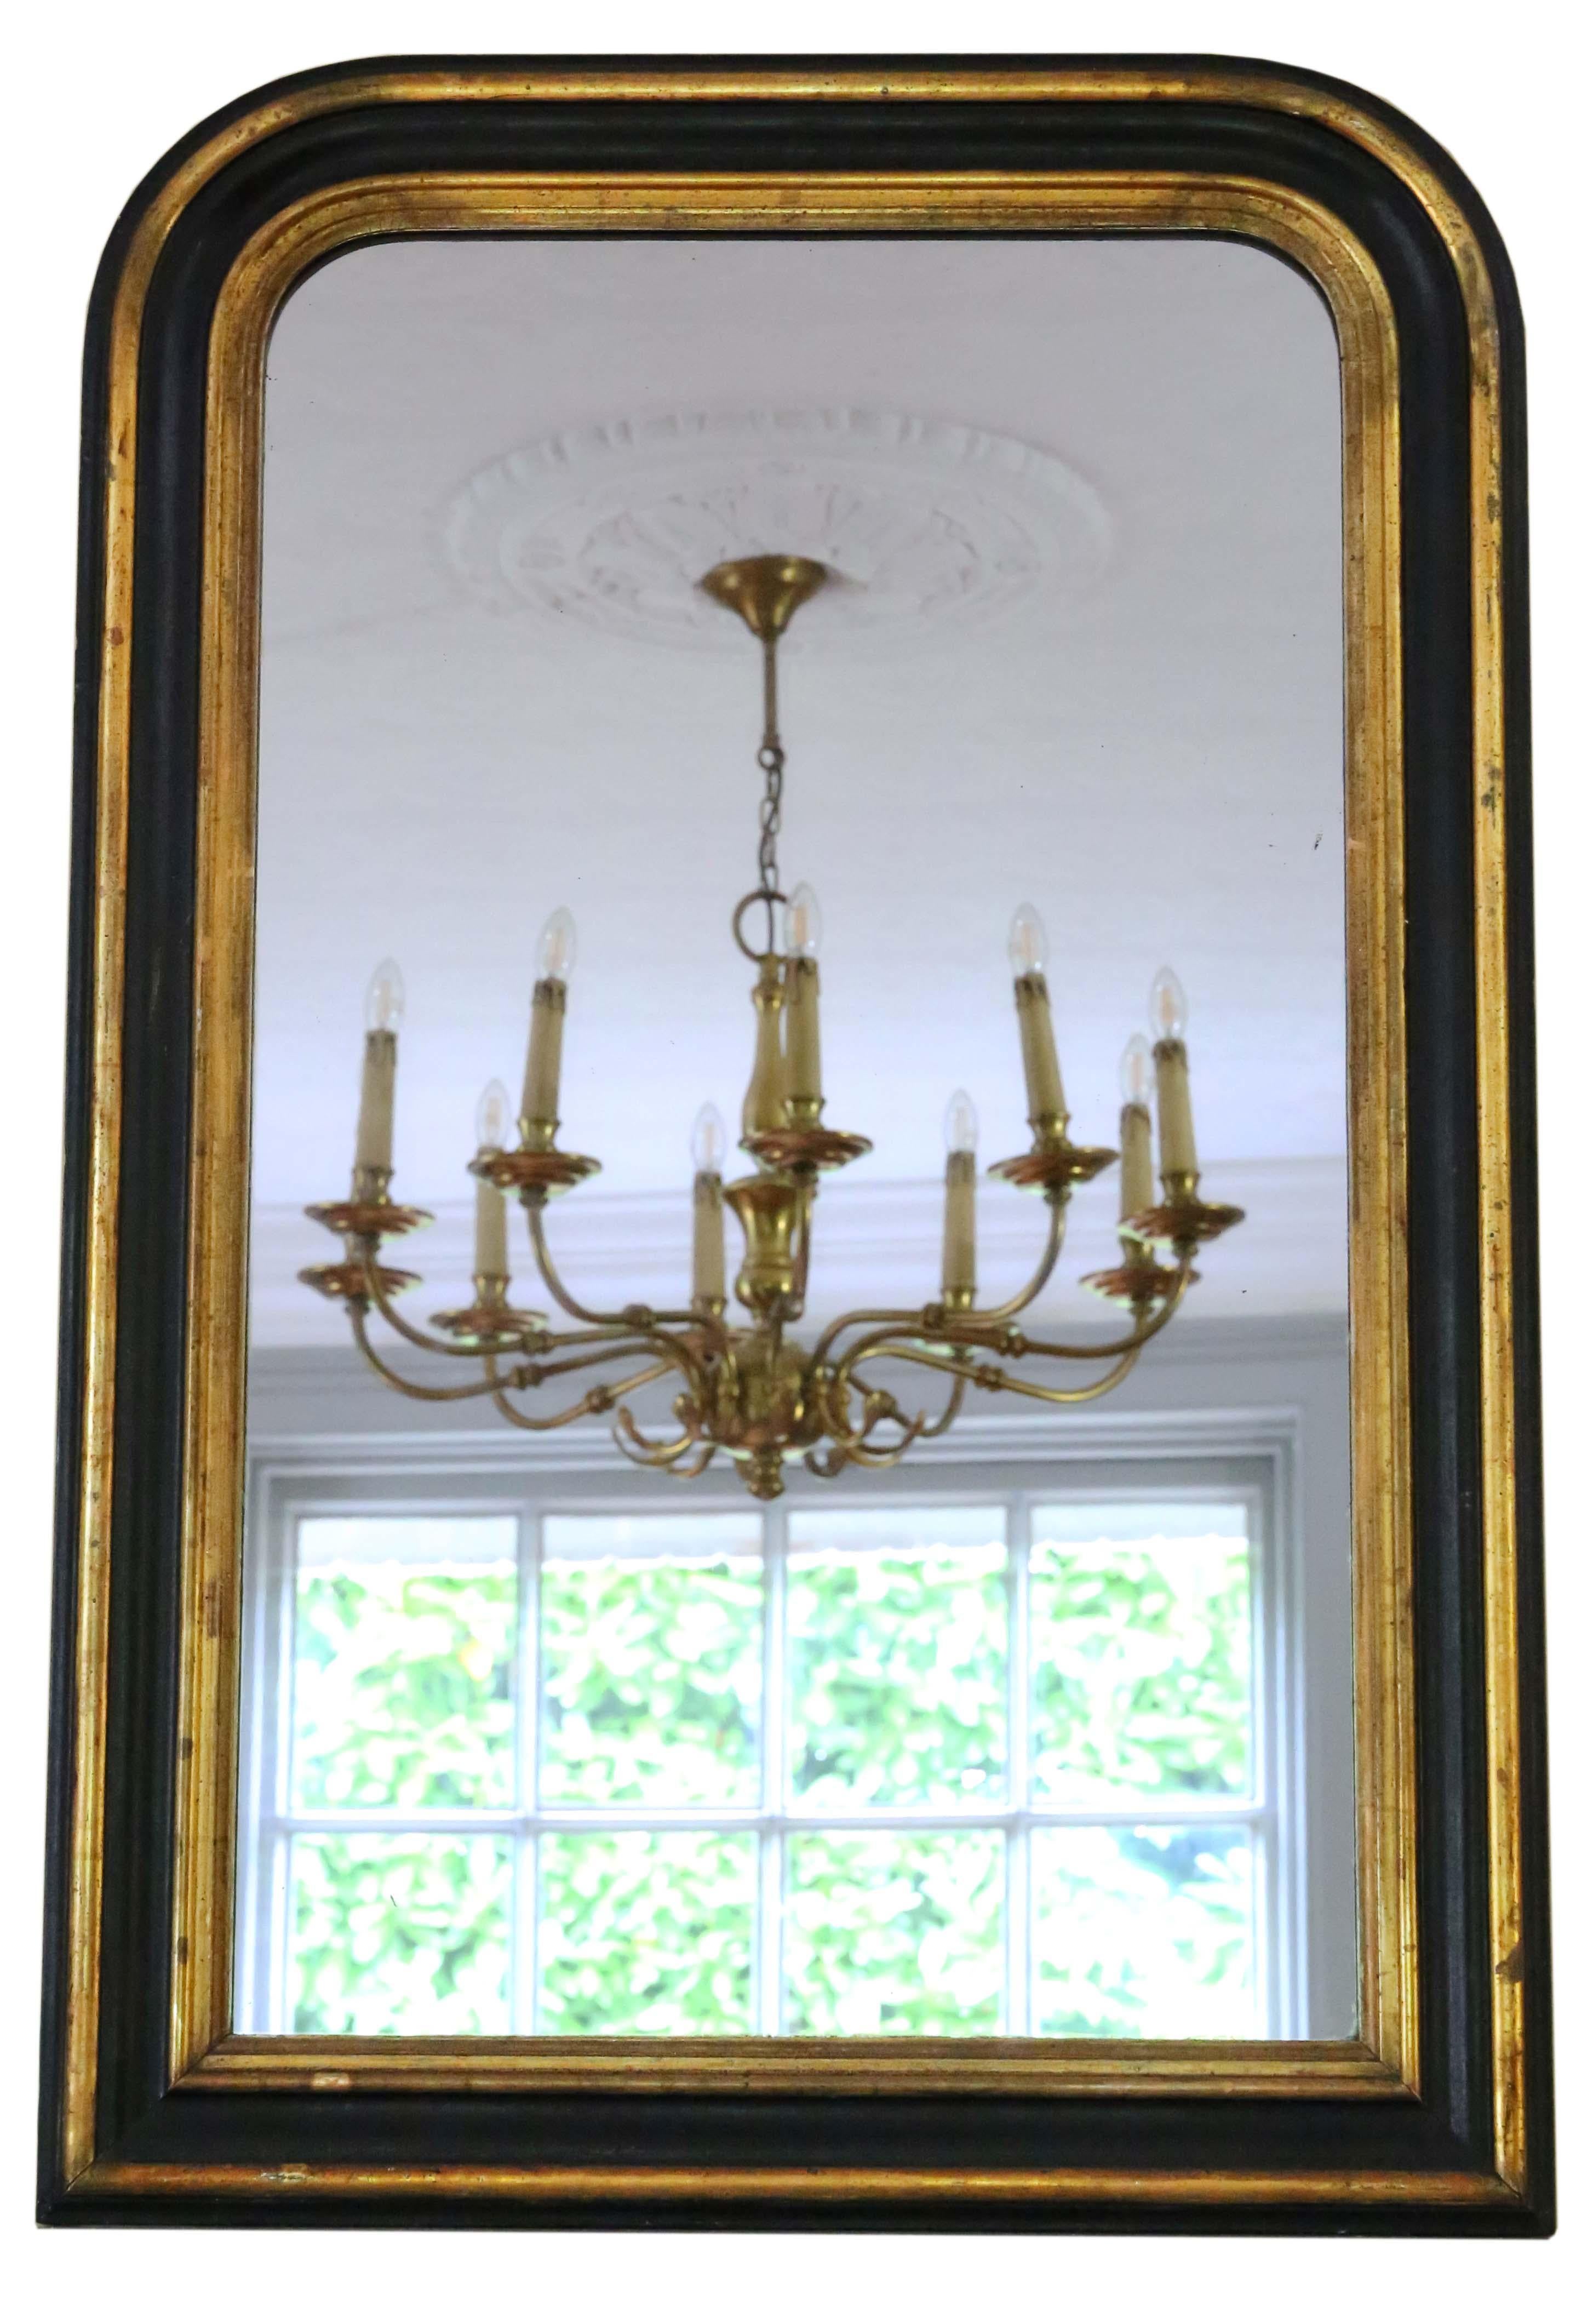 Antique shaped 19th Century large quality black ebonised and gilt overmantle or wall mirror. Lovely charm and elegance. Original finish with minor losses, refinishing and touching up.

This is a lovely, rare mirror. A bit different and quite